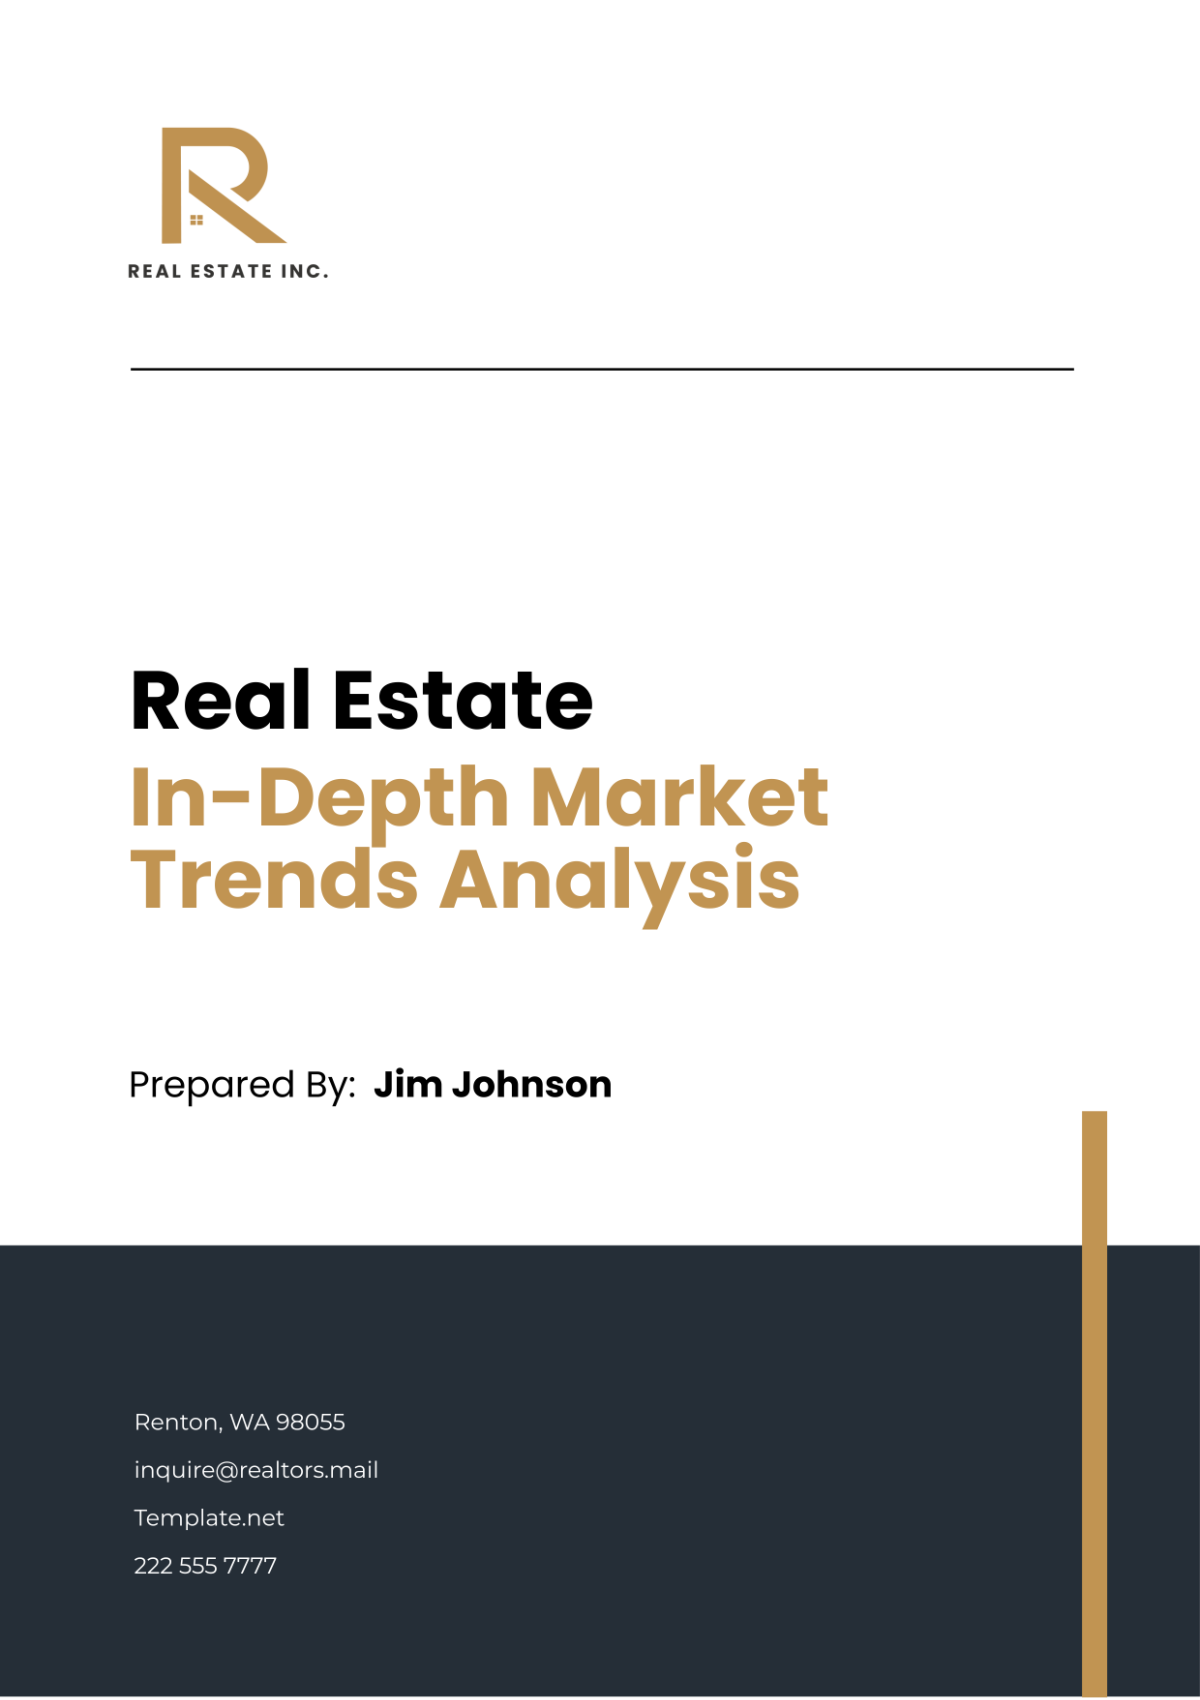 Real Estate In-Depth Market Trends Analysis Template